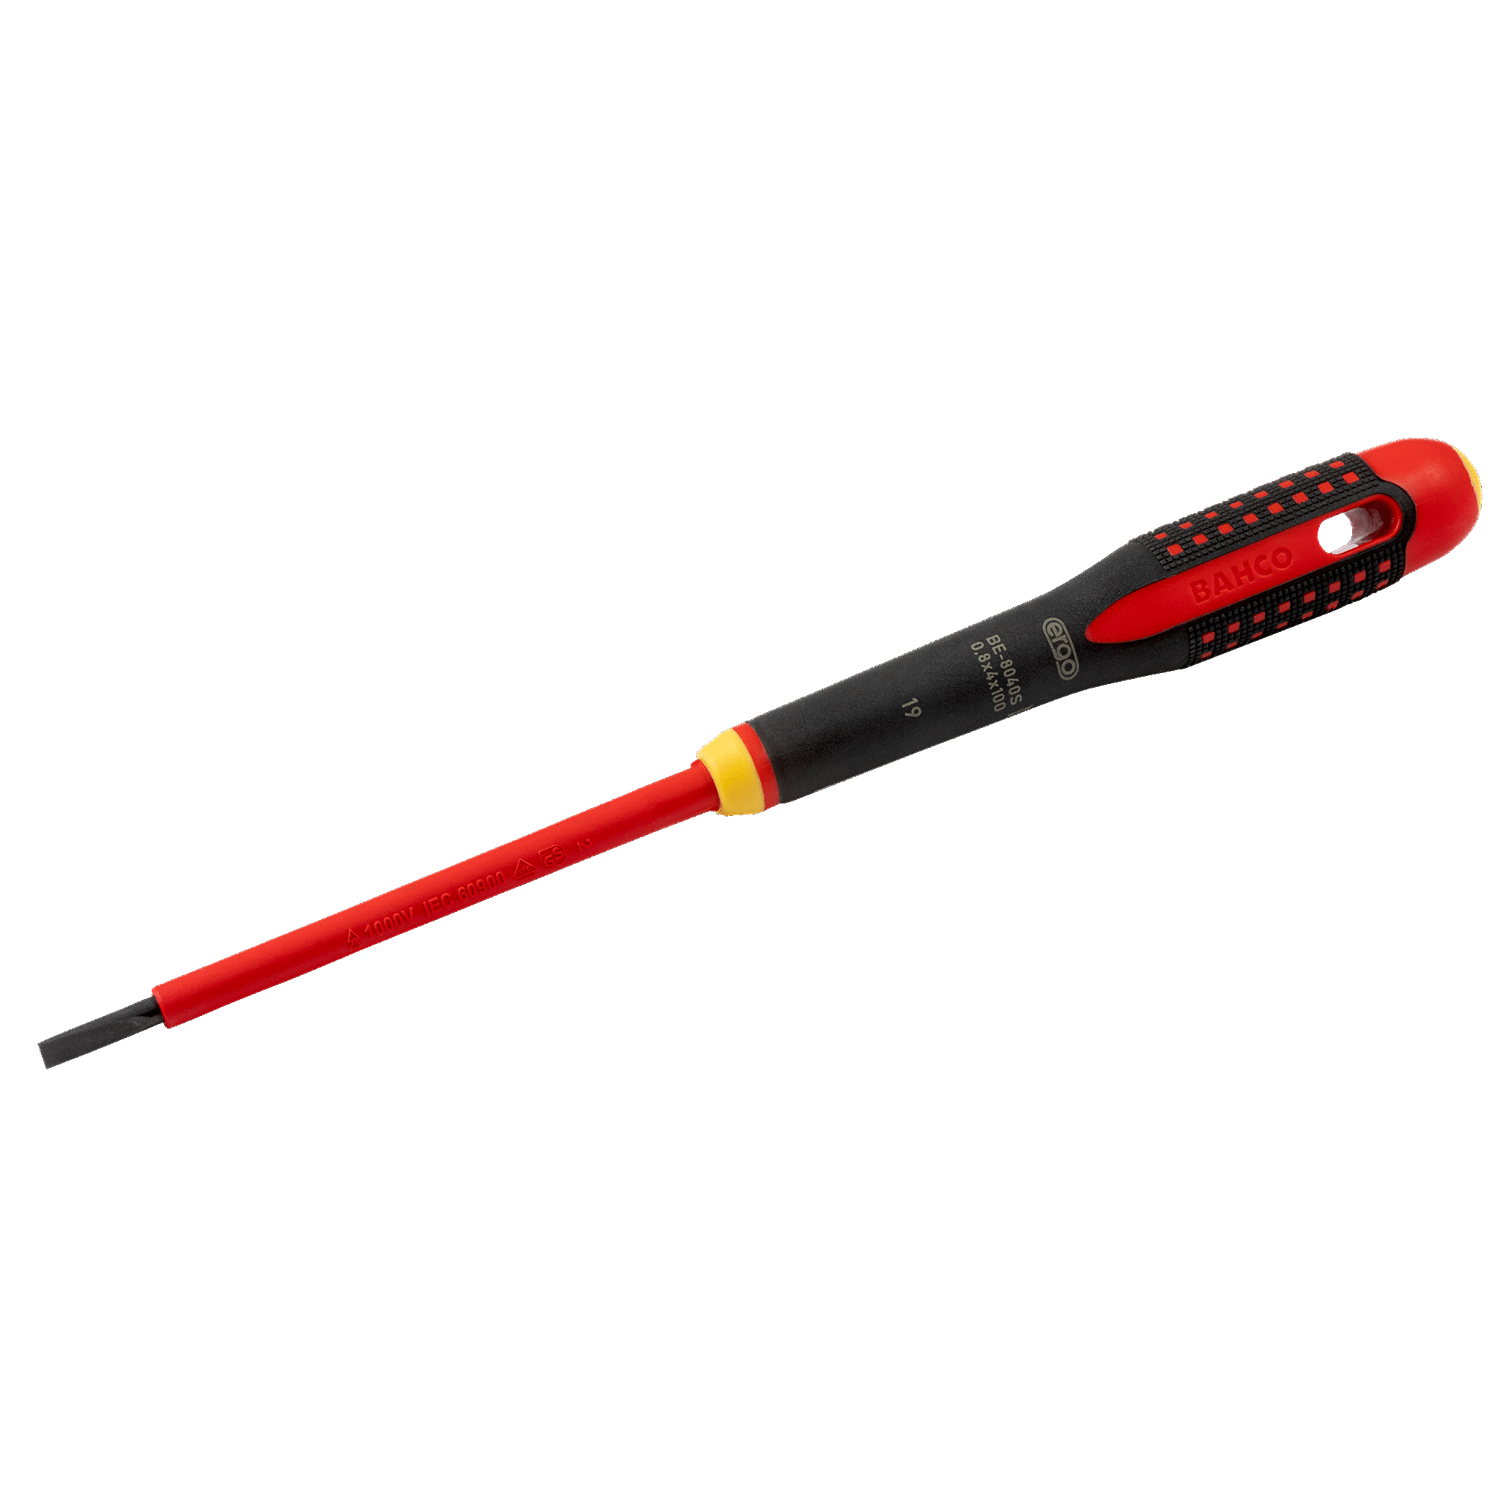 BAHCO BE-8010S - BE-8065S ERGO Insulated Slotted VDE Screwdriver - Premium VDE Screwdriver from BAHCO - Shop now at Yew Aik.